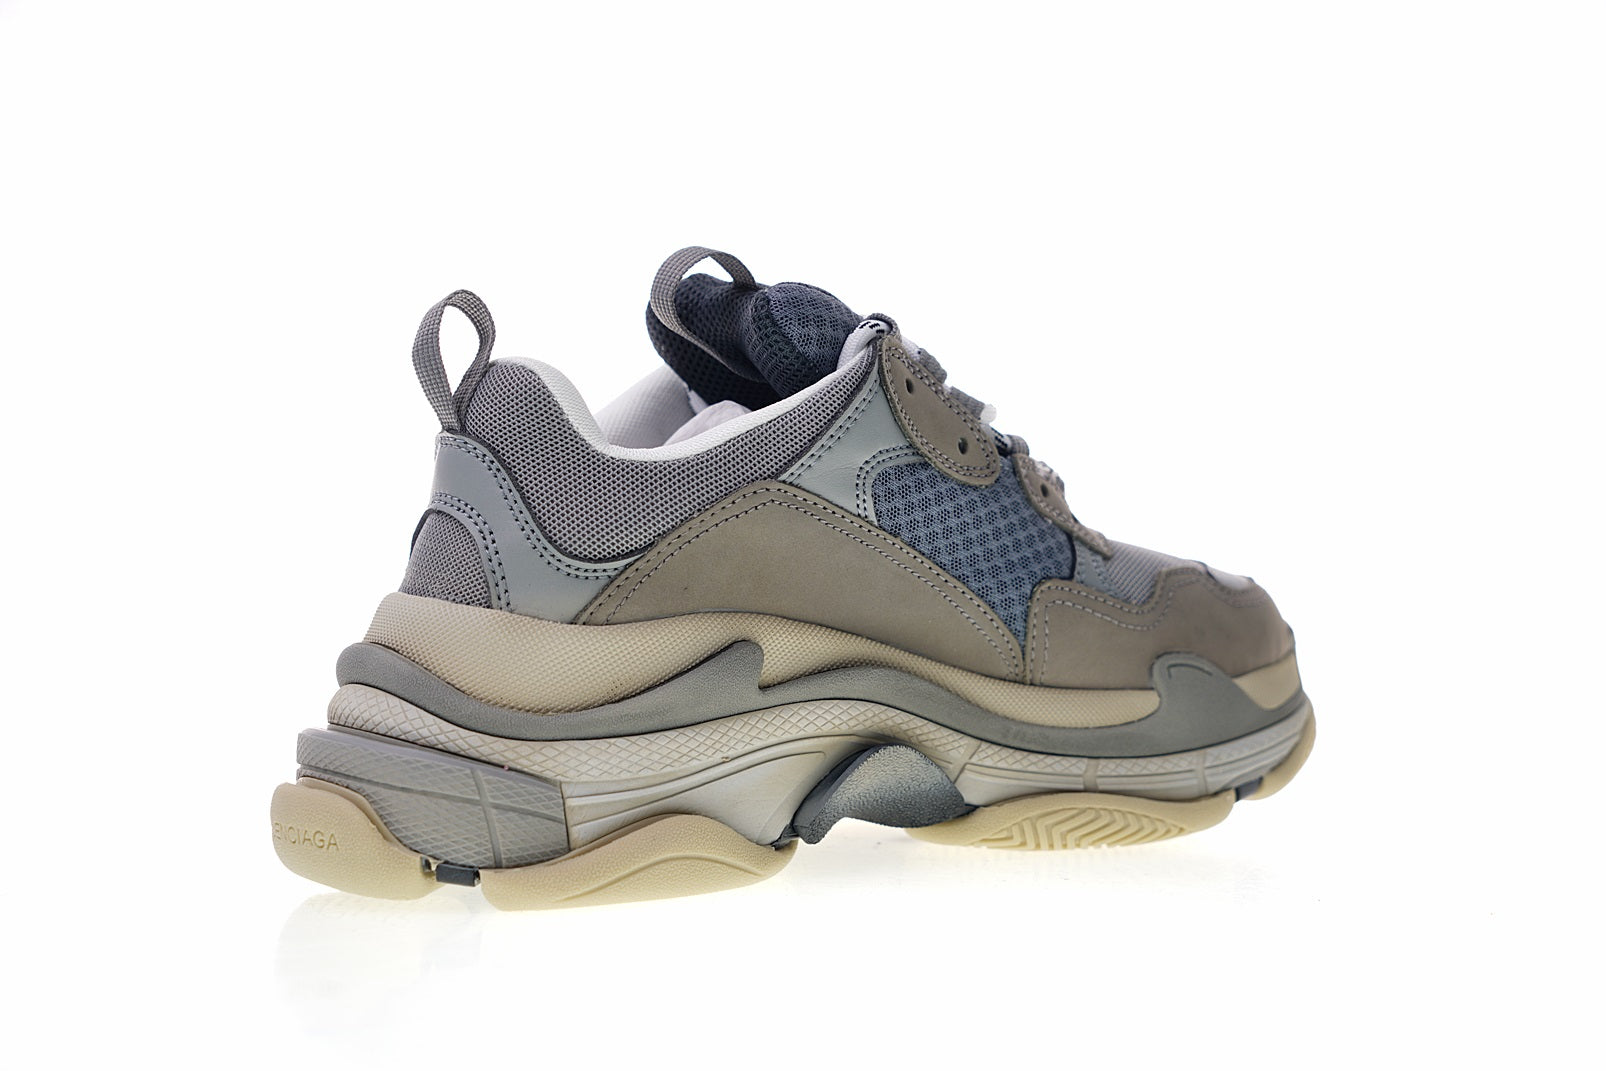 Triple s blue and grey solid sole - whatever on 